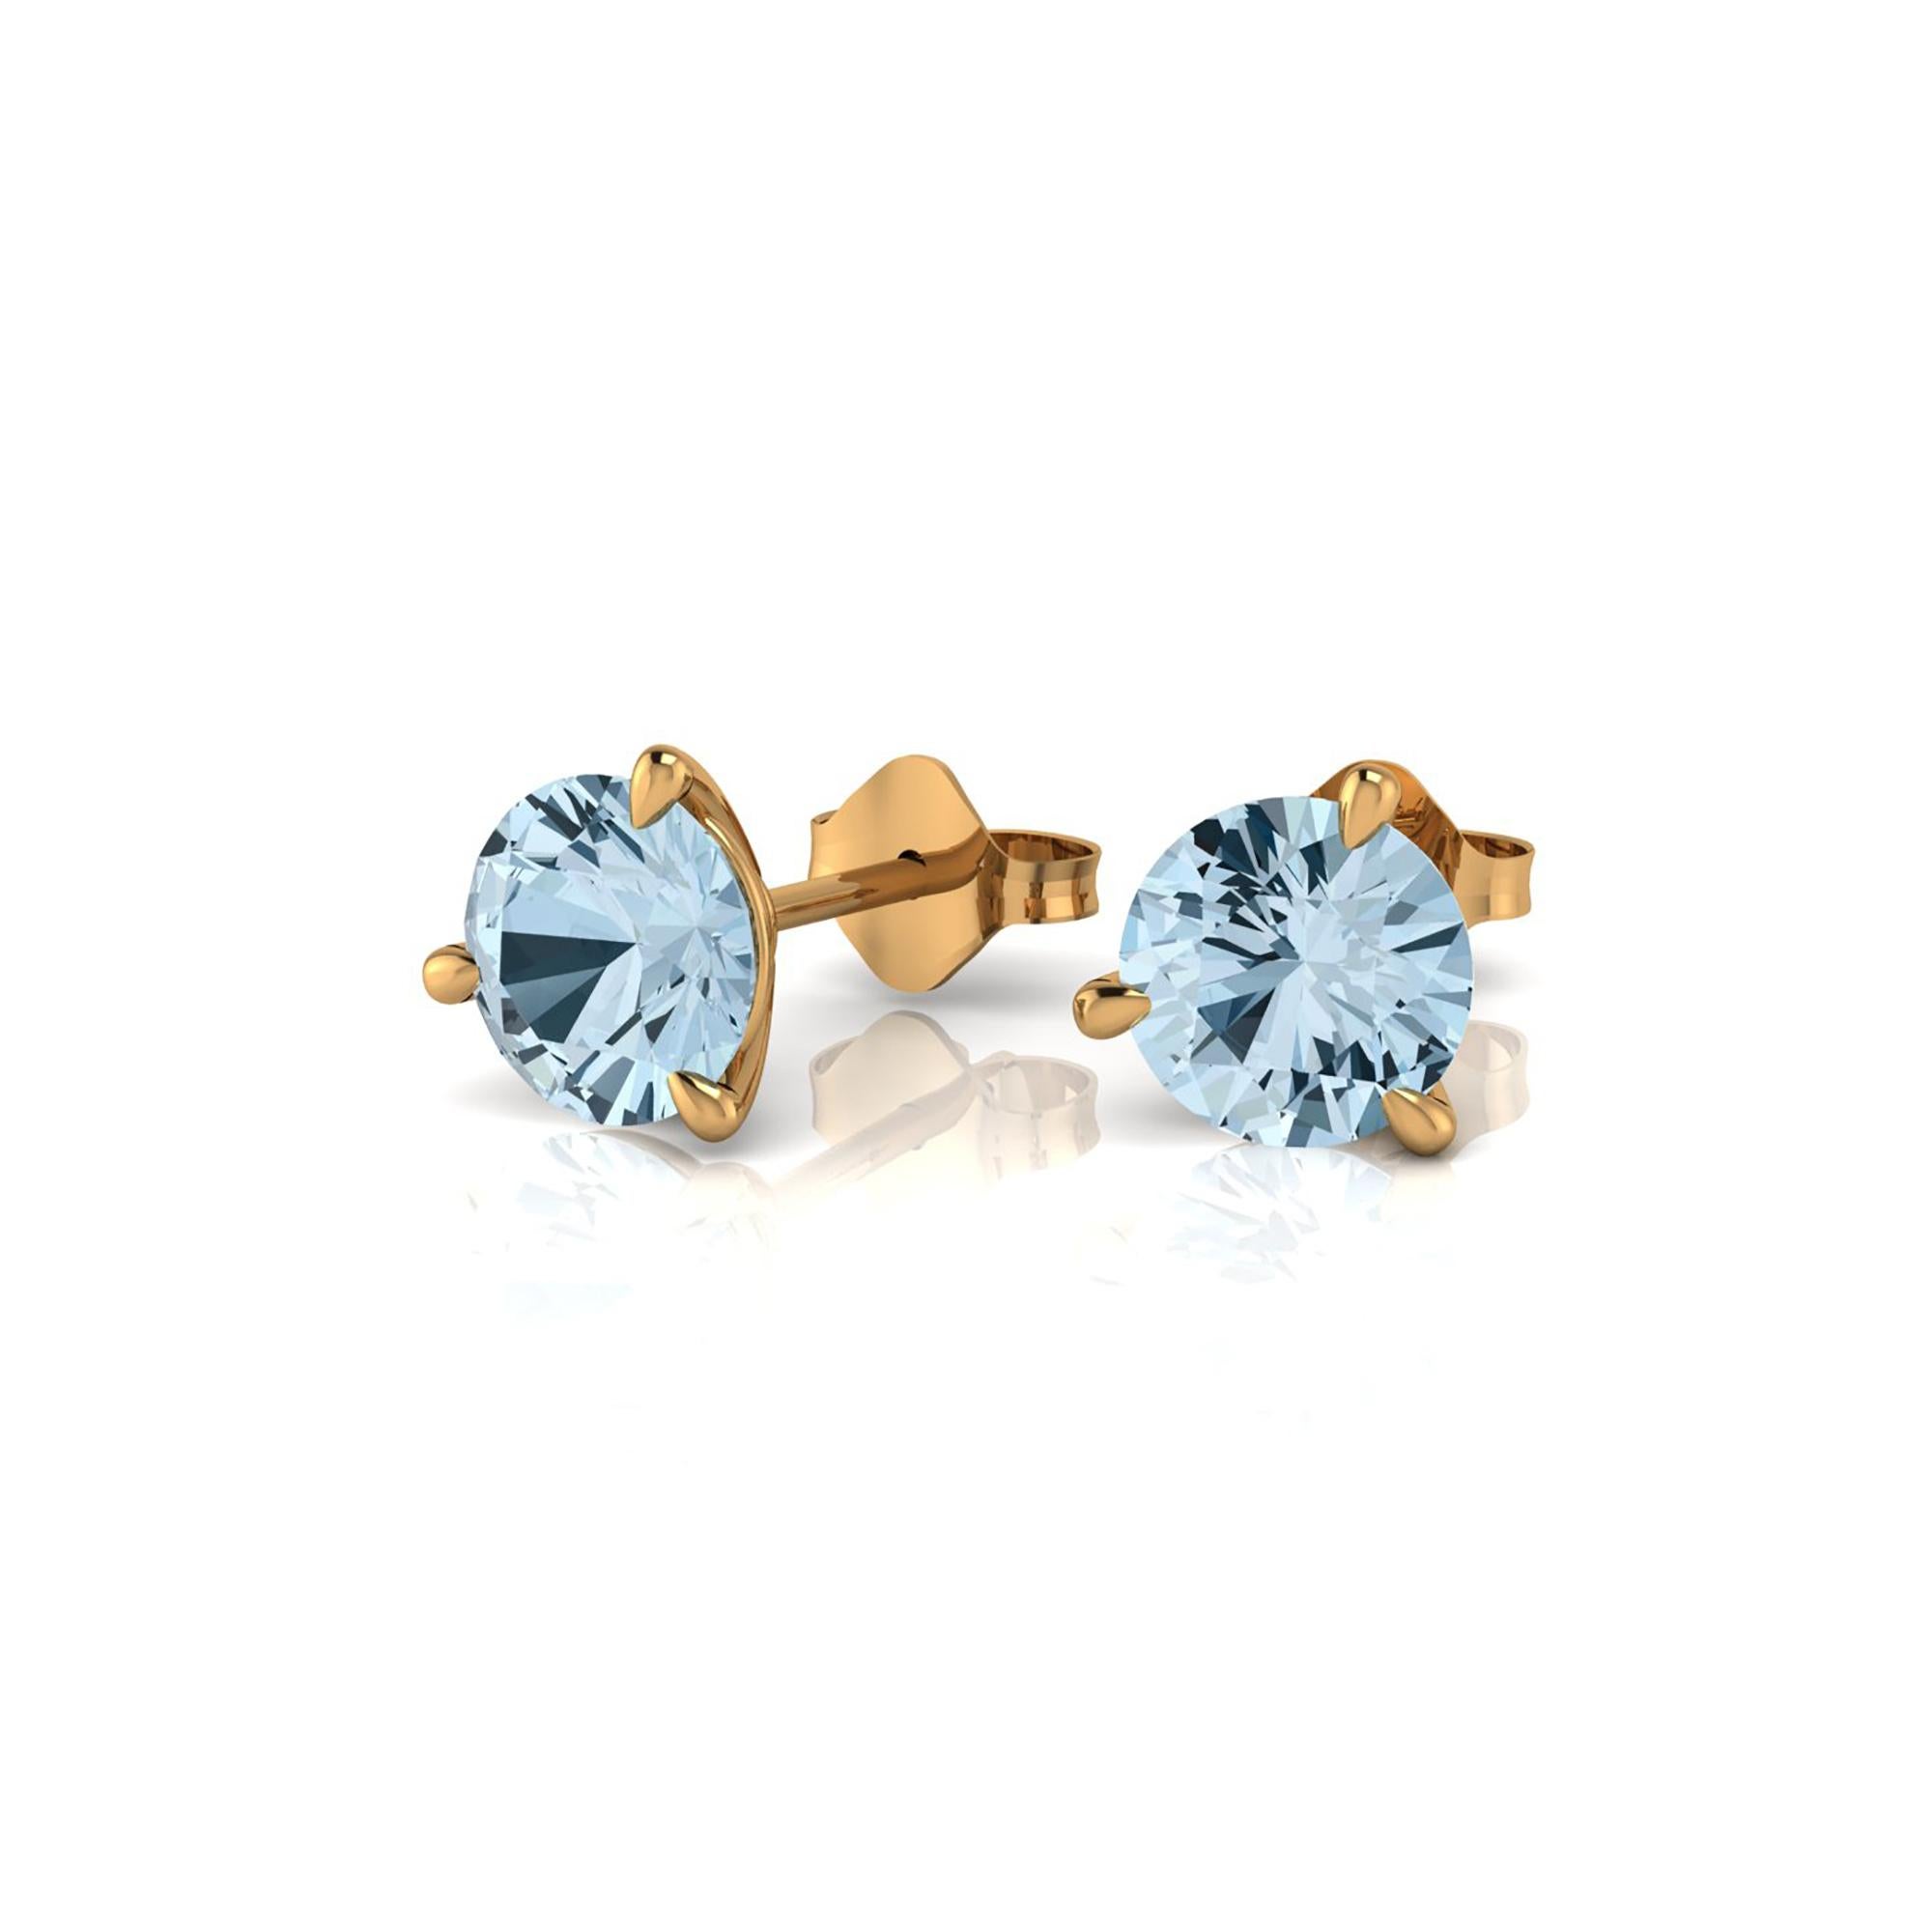 2.30 carat Aquamarine Martini ear-studs, hand made in 18k yellow gold in New York City with the best Italian craftsmanship,

Perfect gift for any woman and every age, easy to wear from the office to a special evening out.

